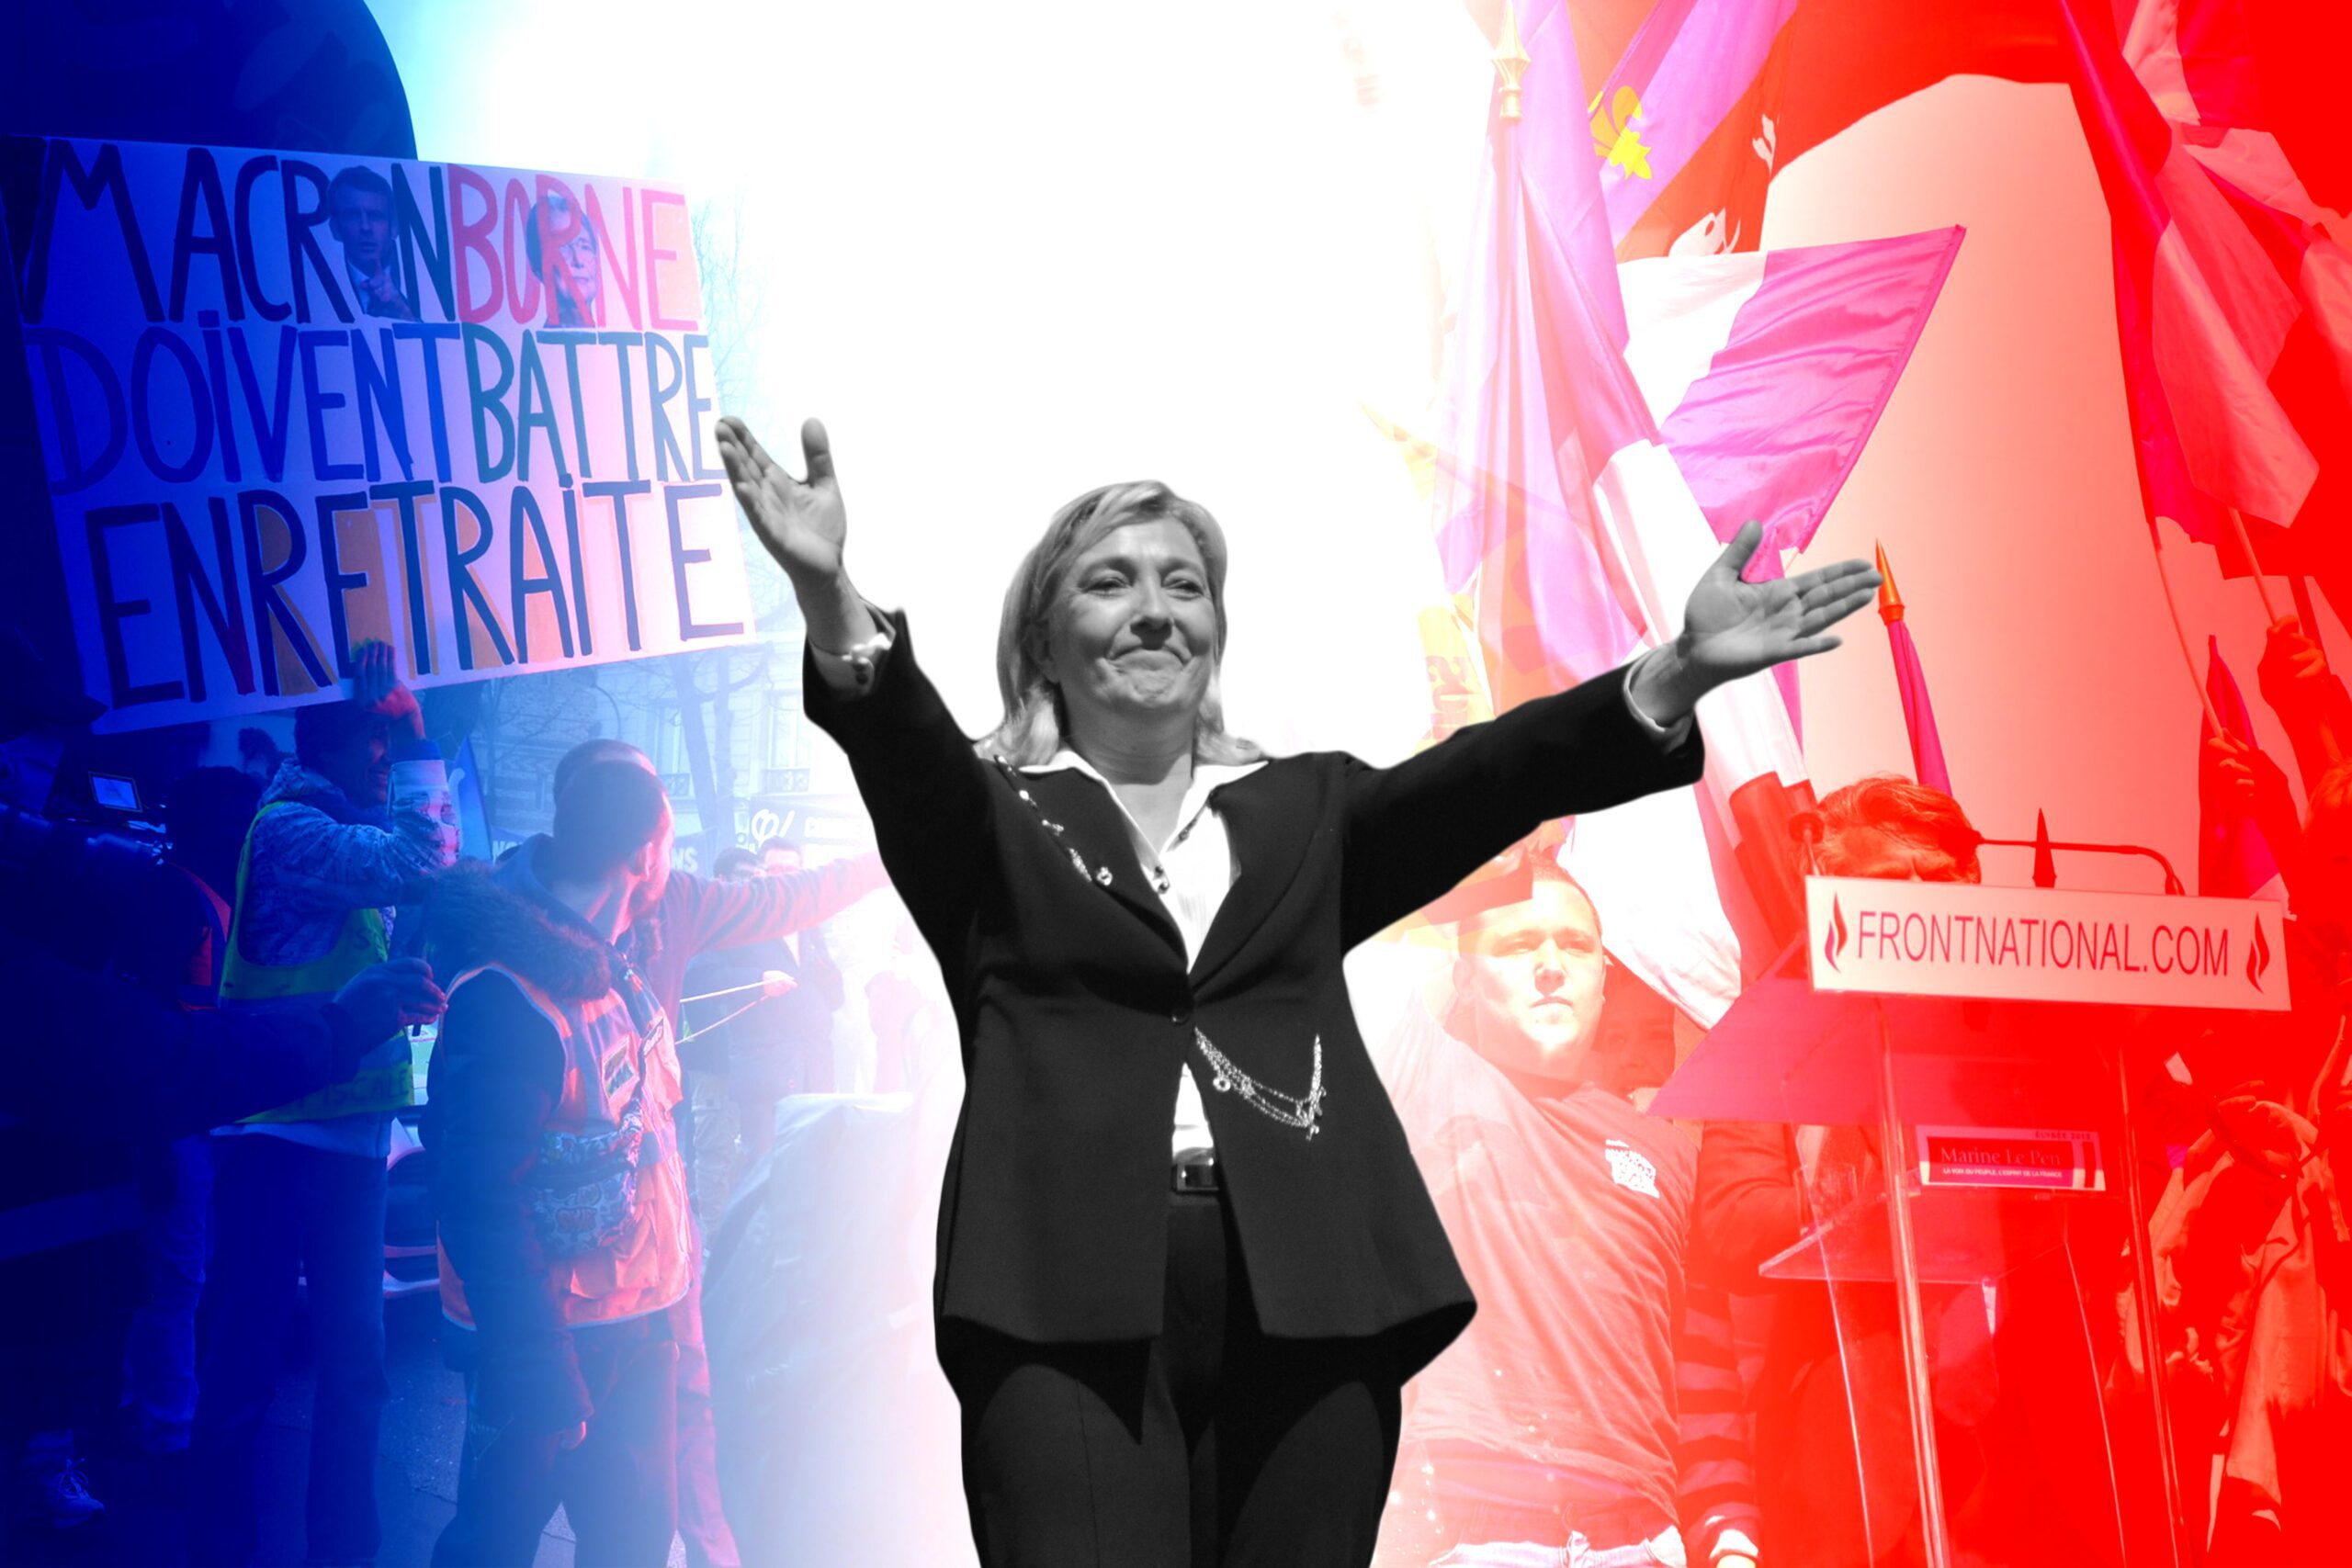 Flashpoint: The Far Right’s Response to Pension Reform in France